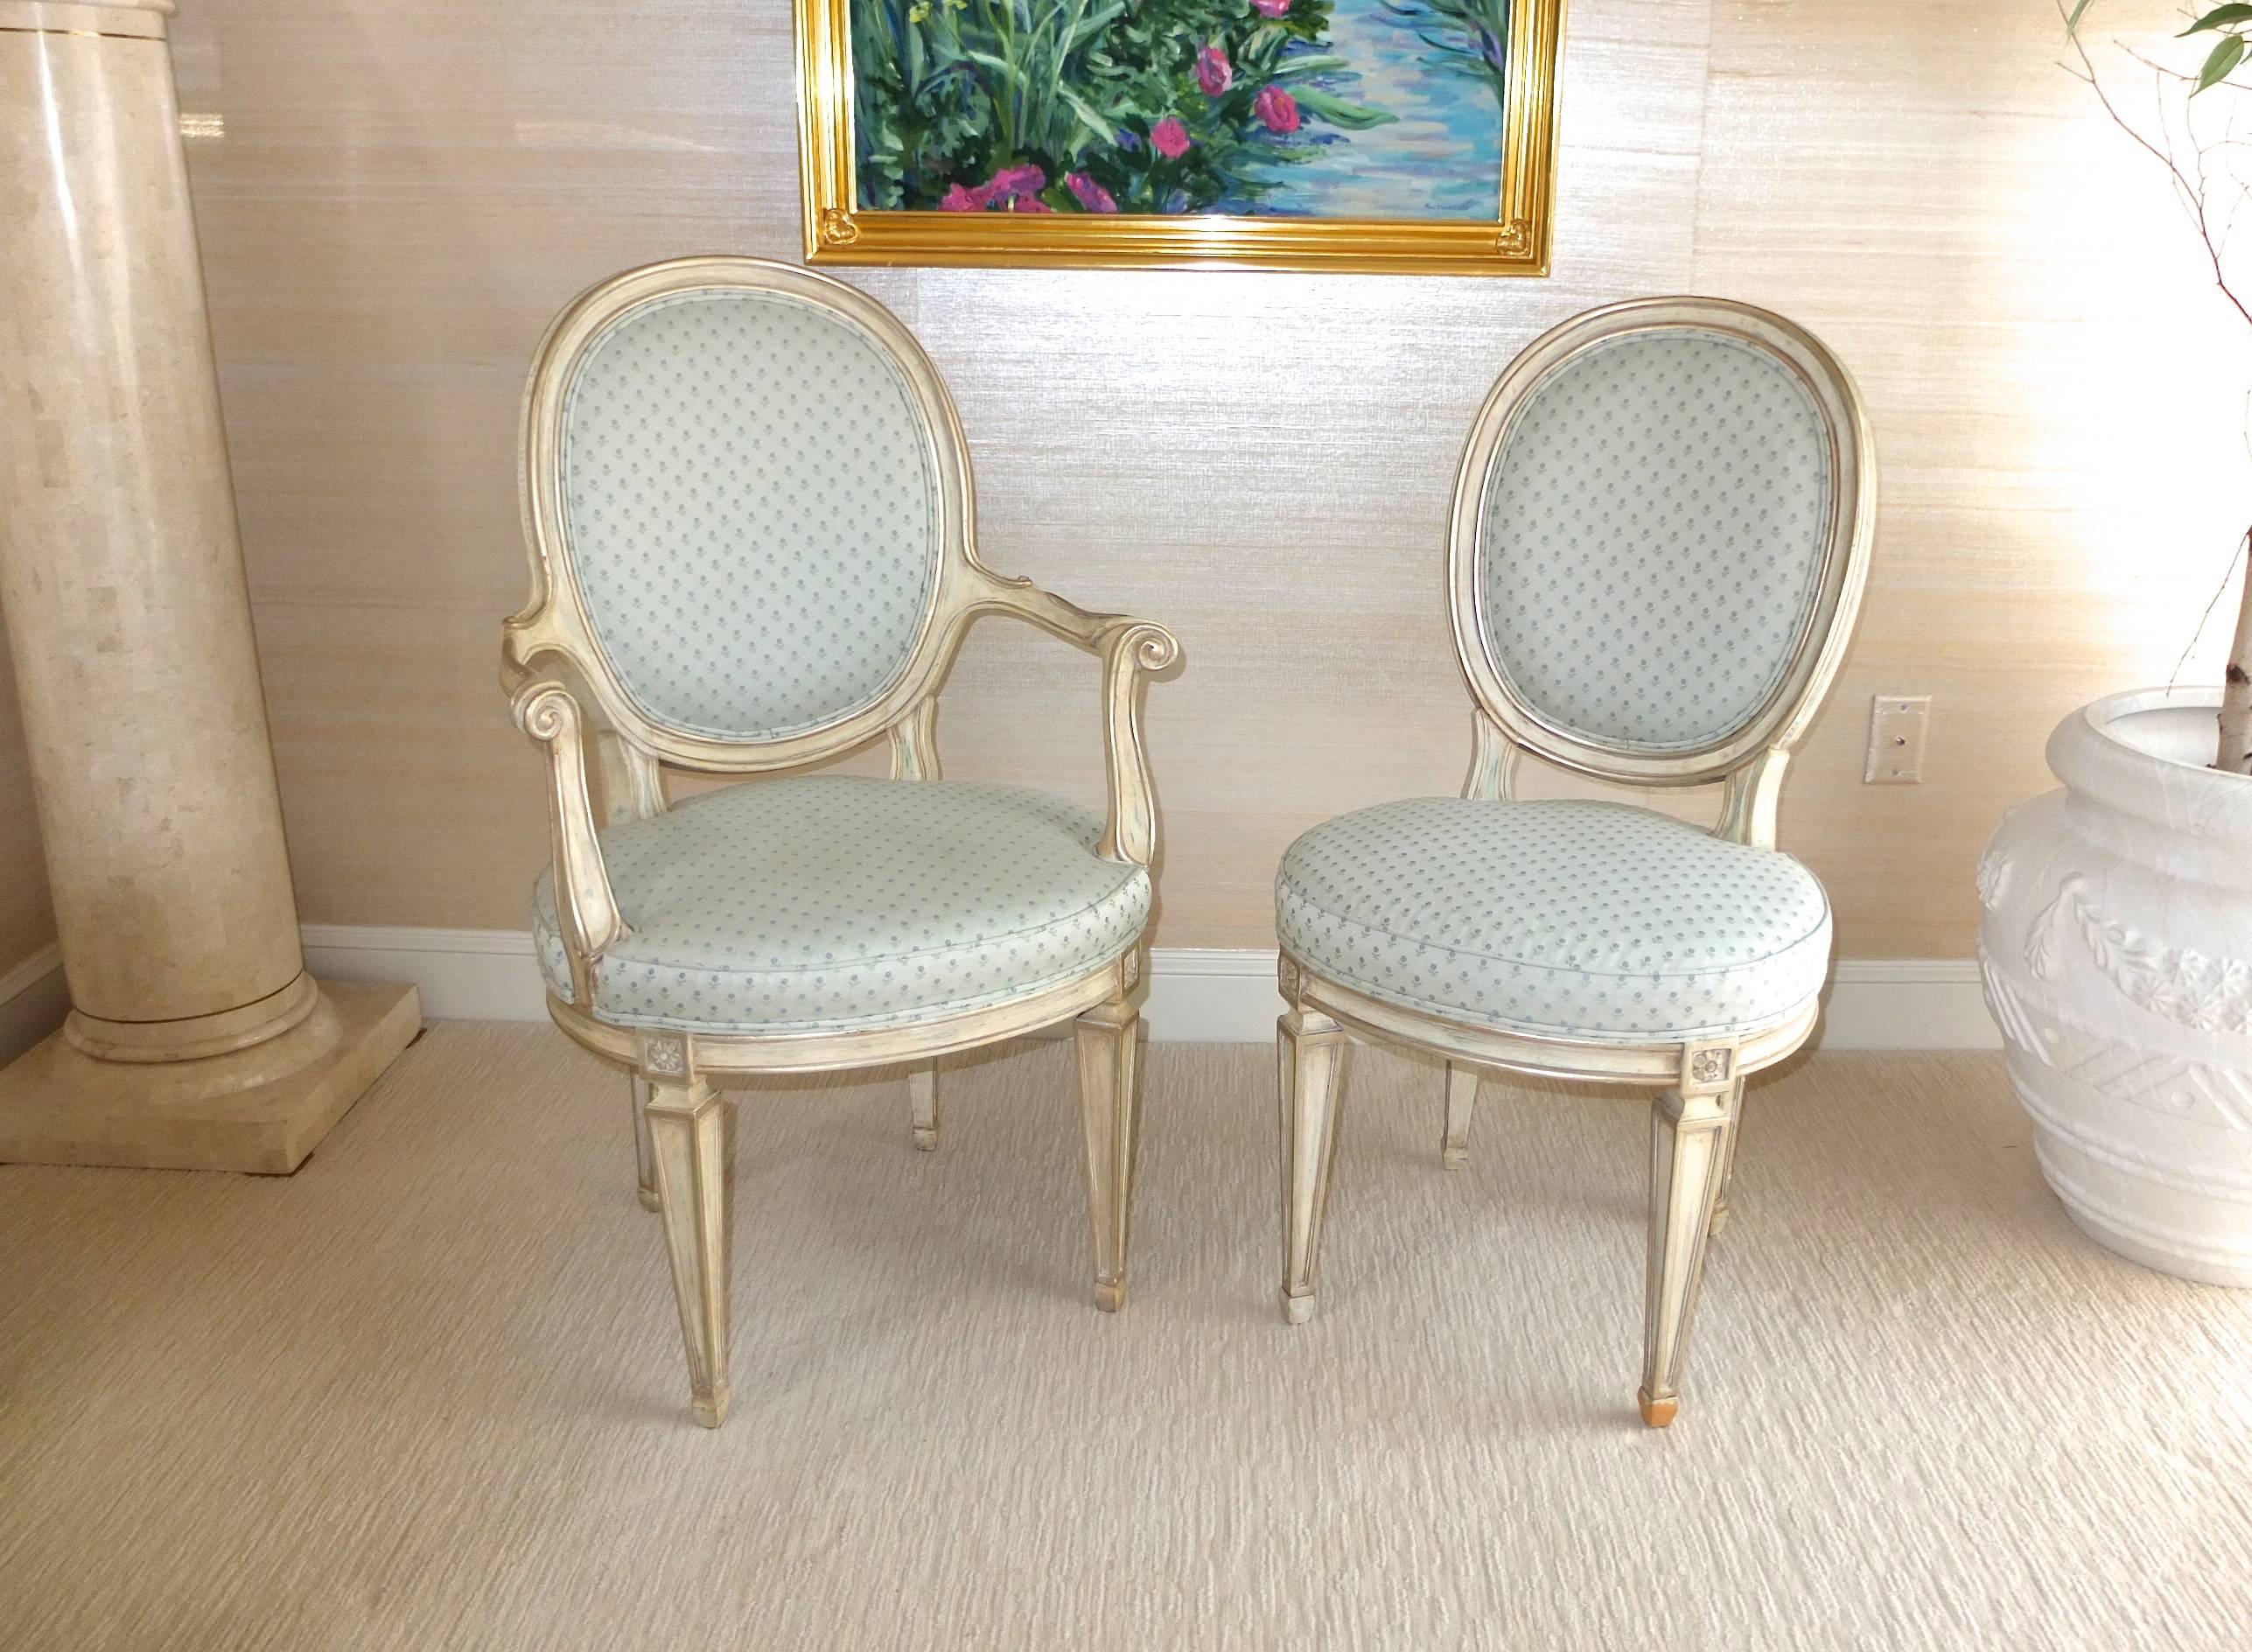 A mixed pair (one with arms) of Louis XV style oval back chairs paint finished in silver cream with Brunschwig & Fils cotton and silk small patterned leaf design in a pale aqua marine color upholstery. 
Dimensions of chair without arms is: 37.5